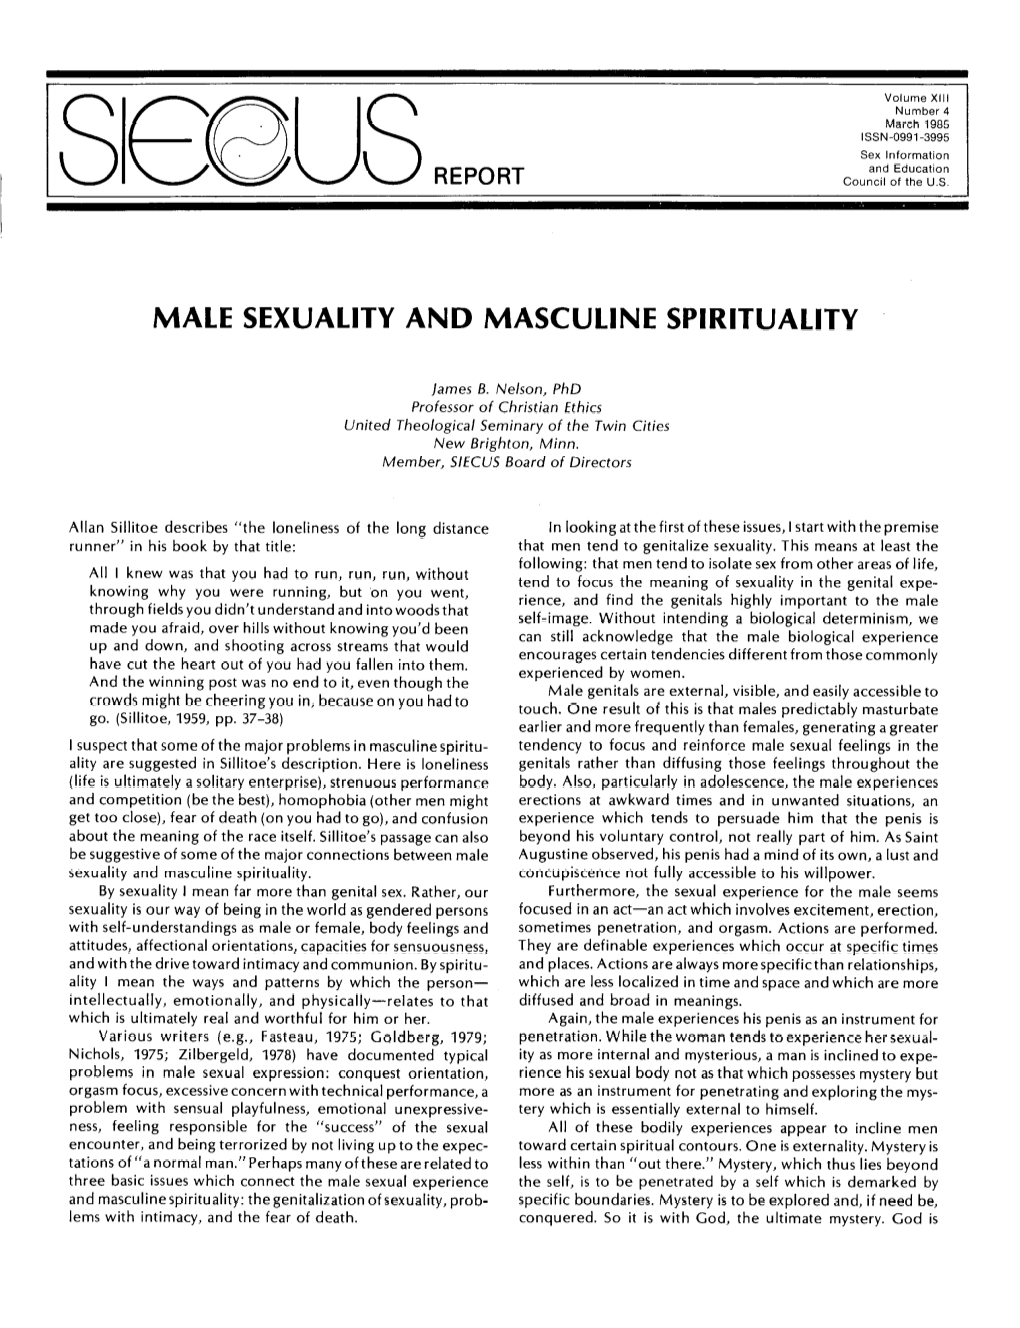 Male Sexuality and Masculine Spirituality